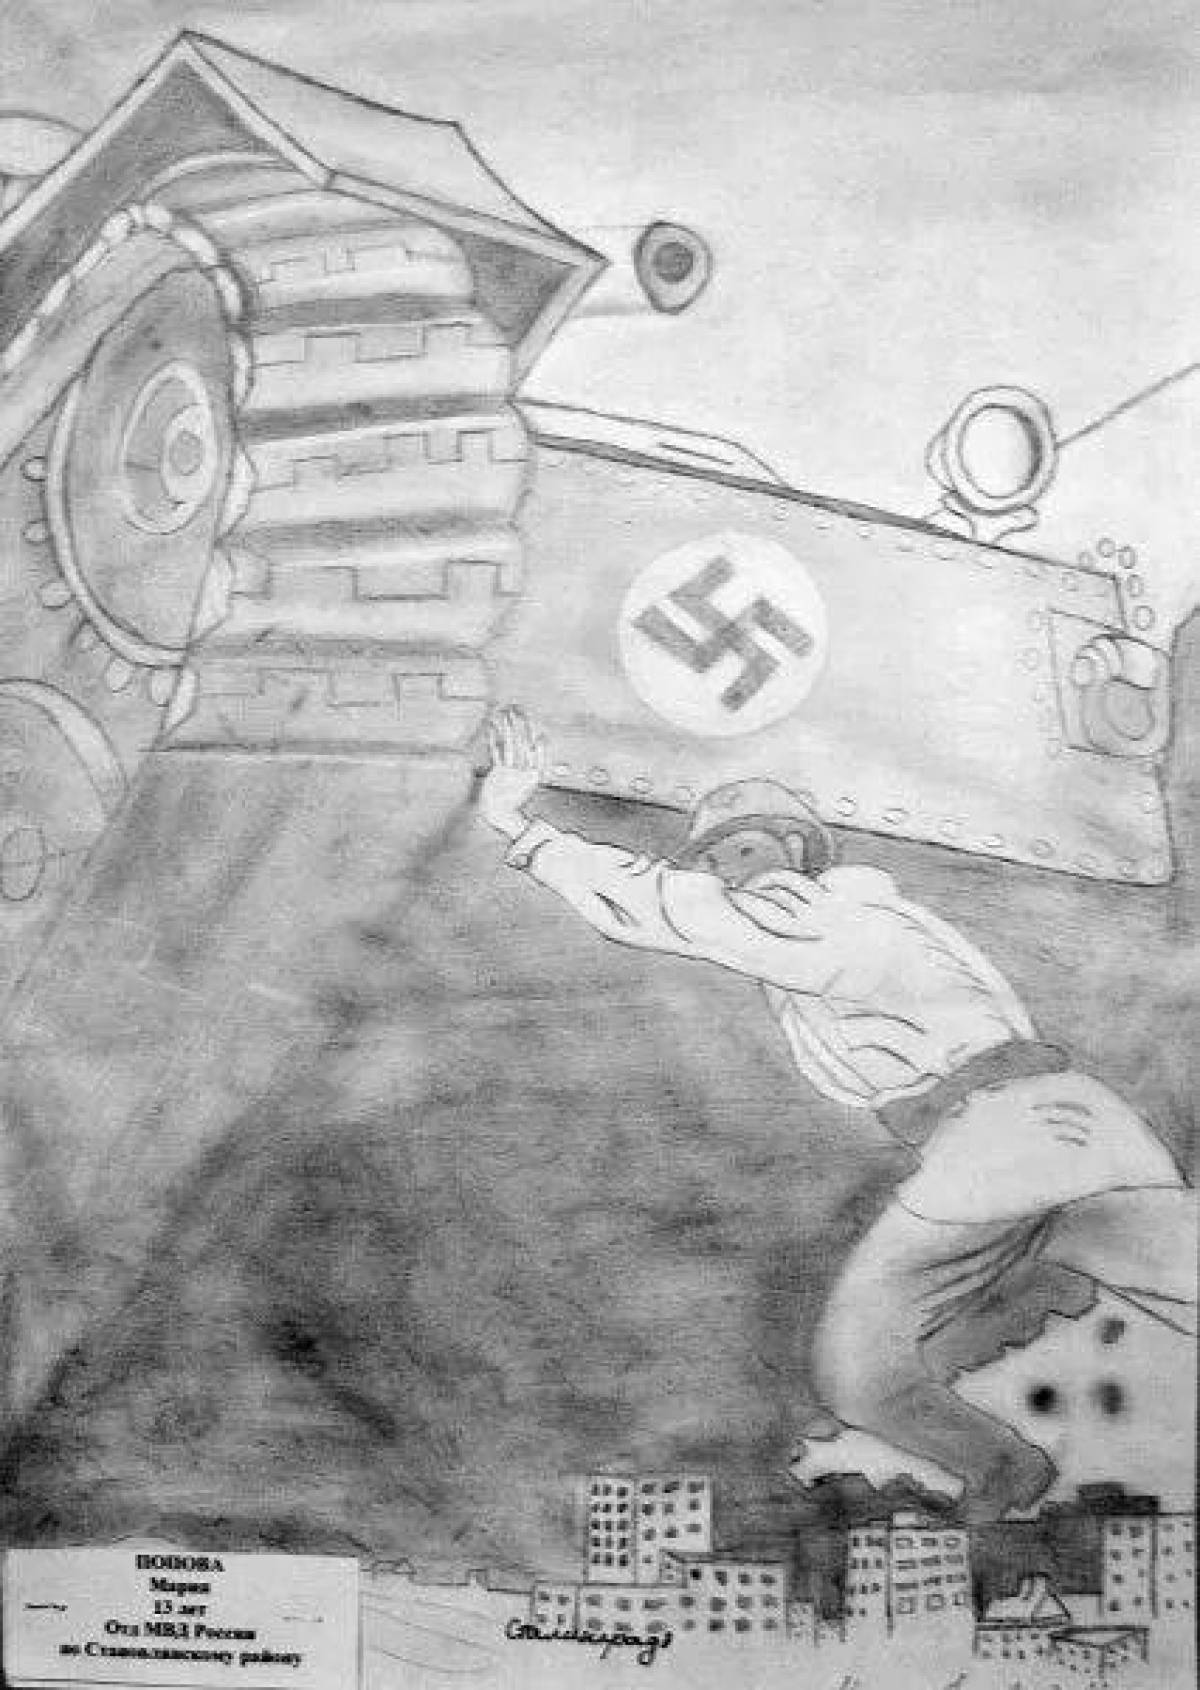 Dramatic drawing of the Battle of Stalingrad